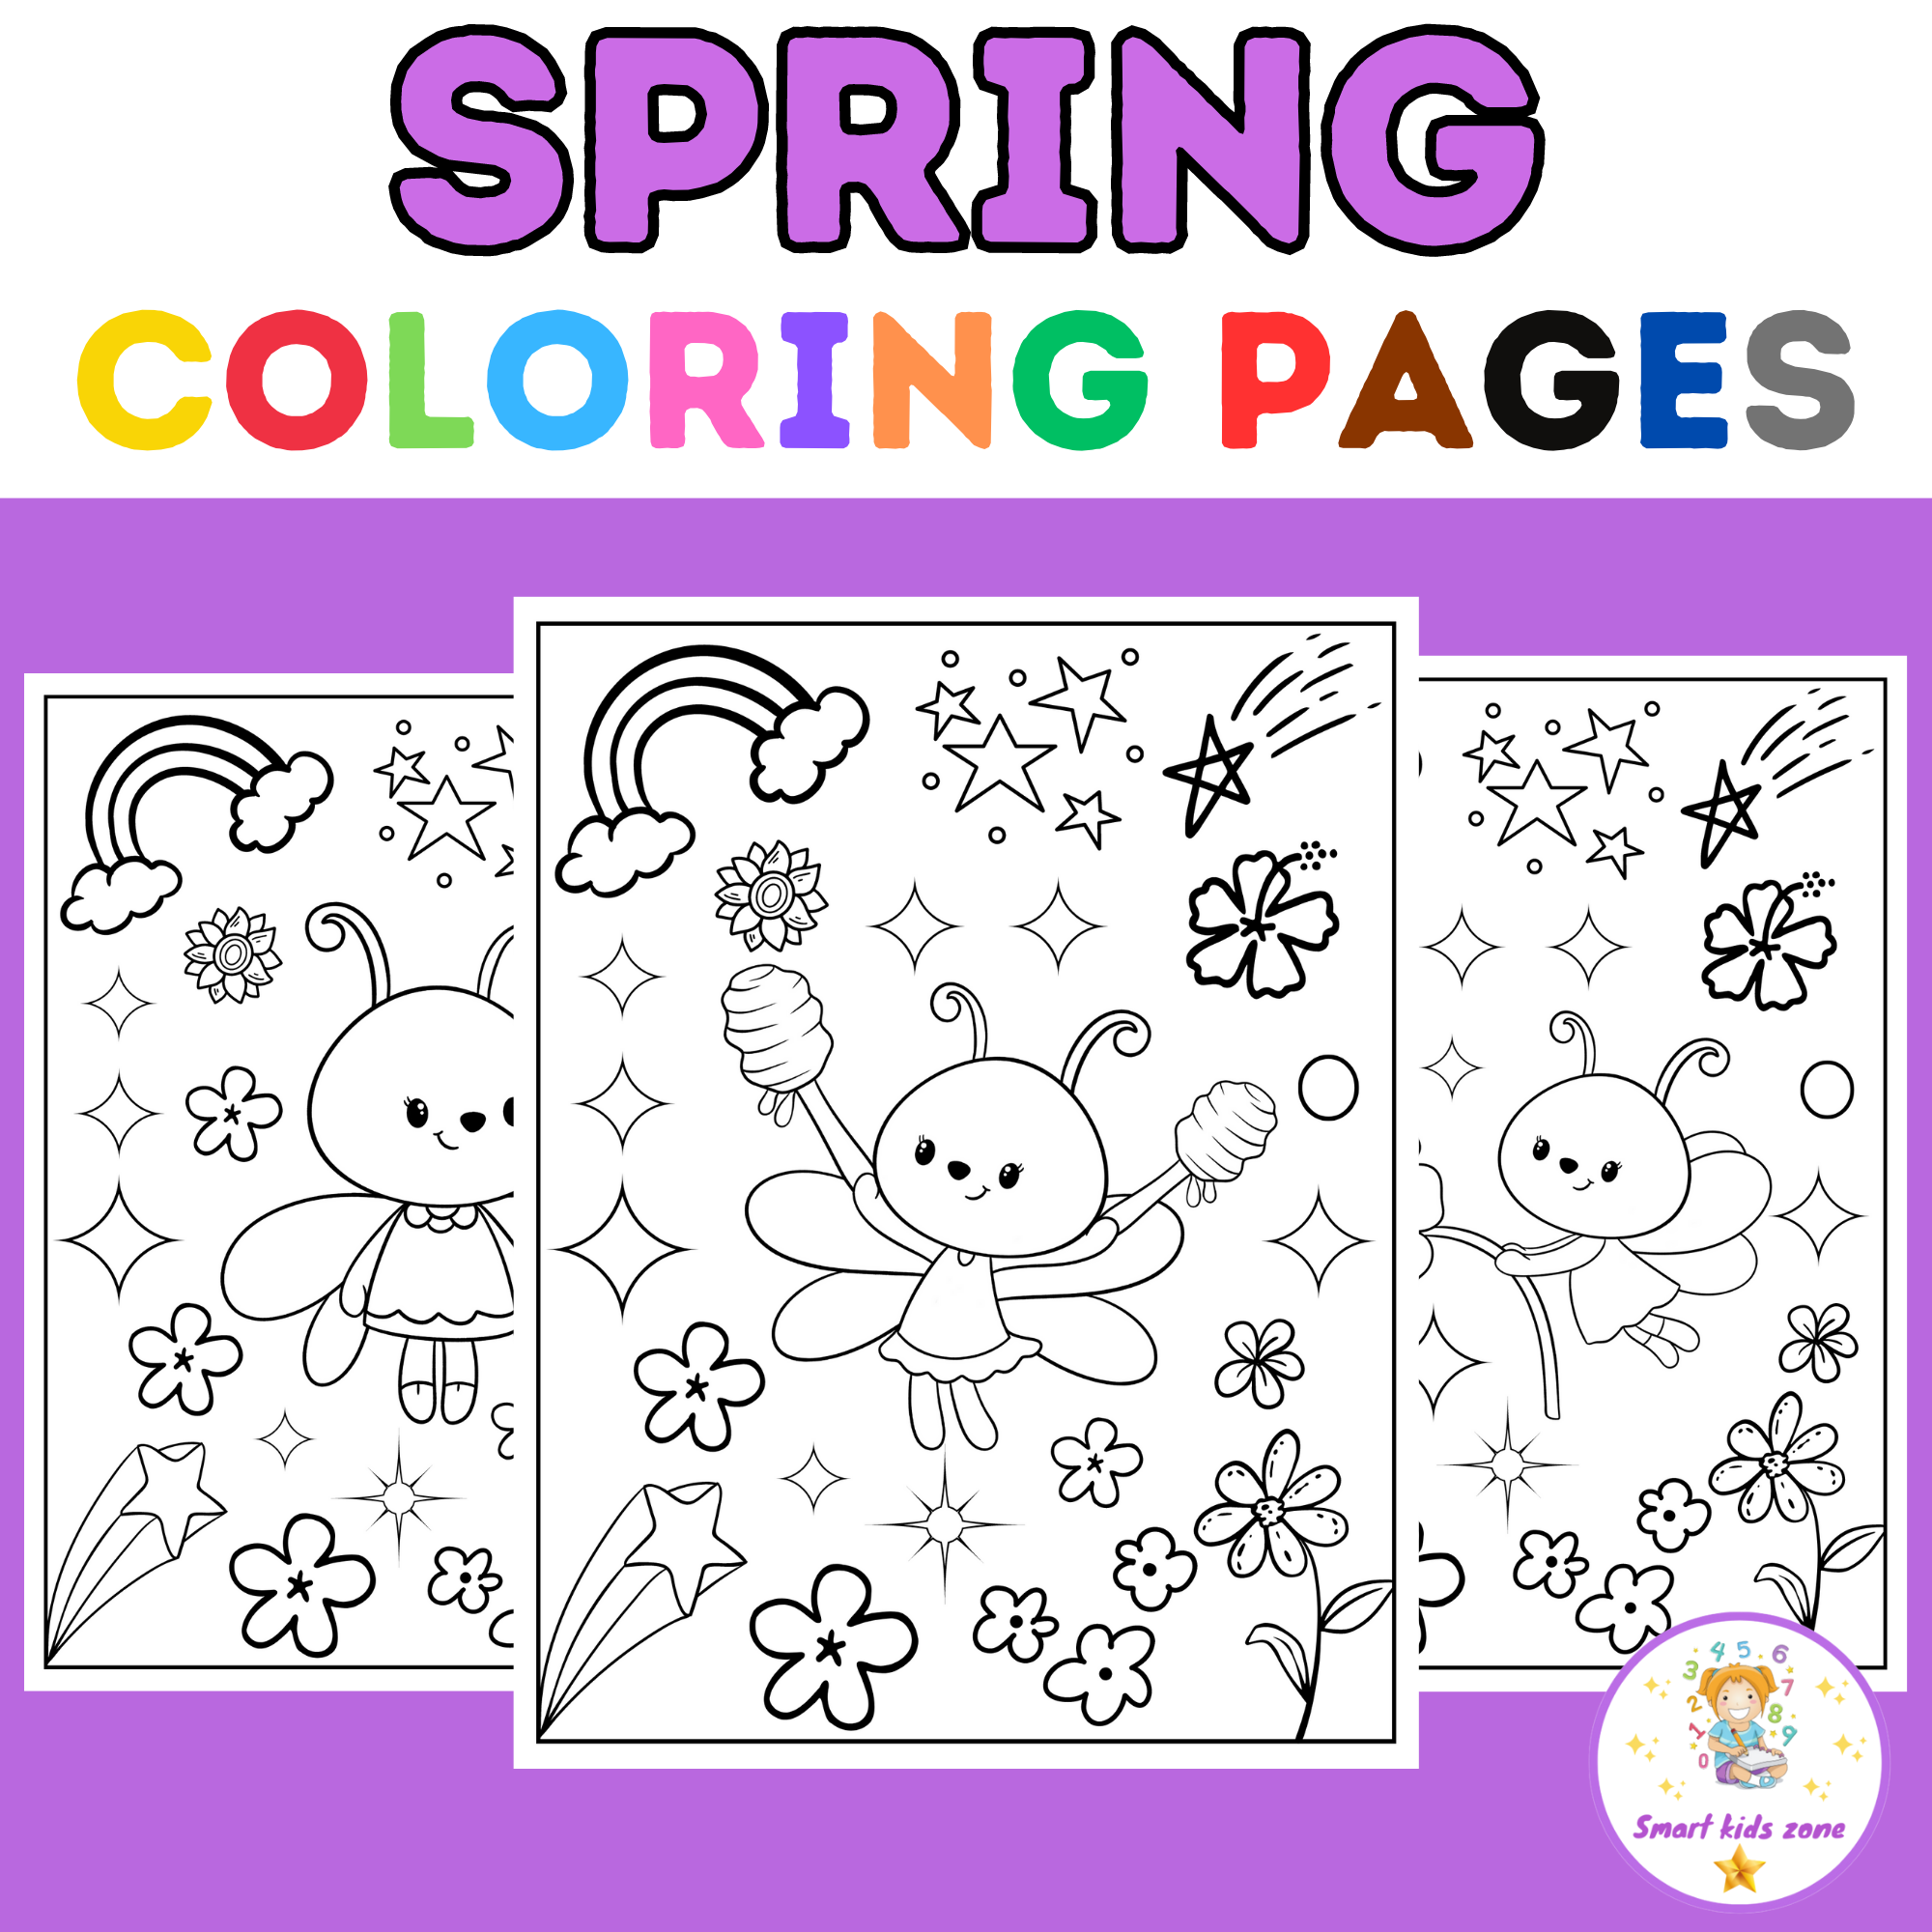 Spring coloring pages for kids buzzy bees of spring spring coloring pages made by teachers